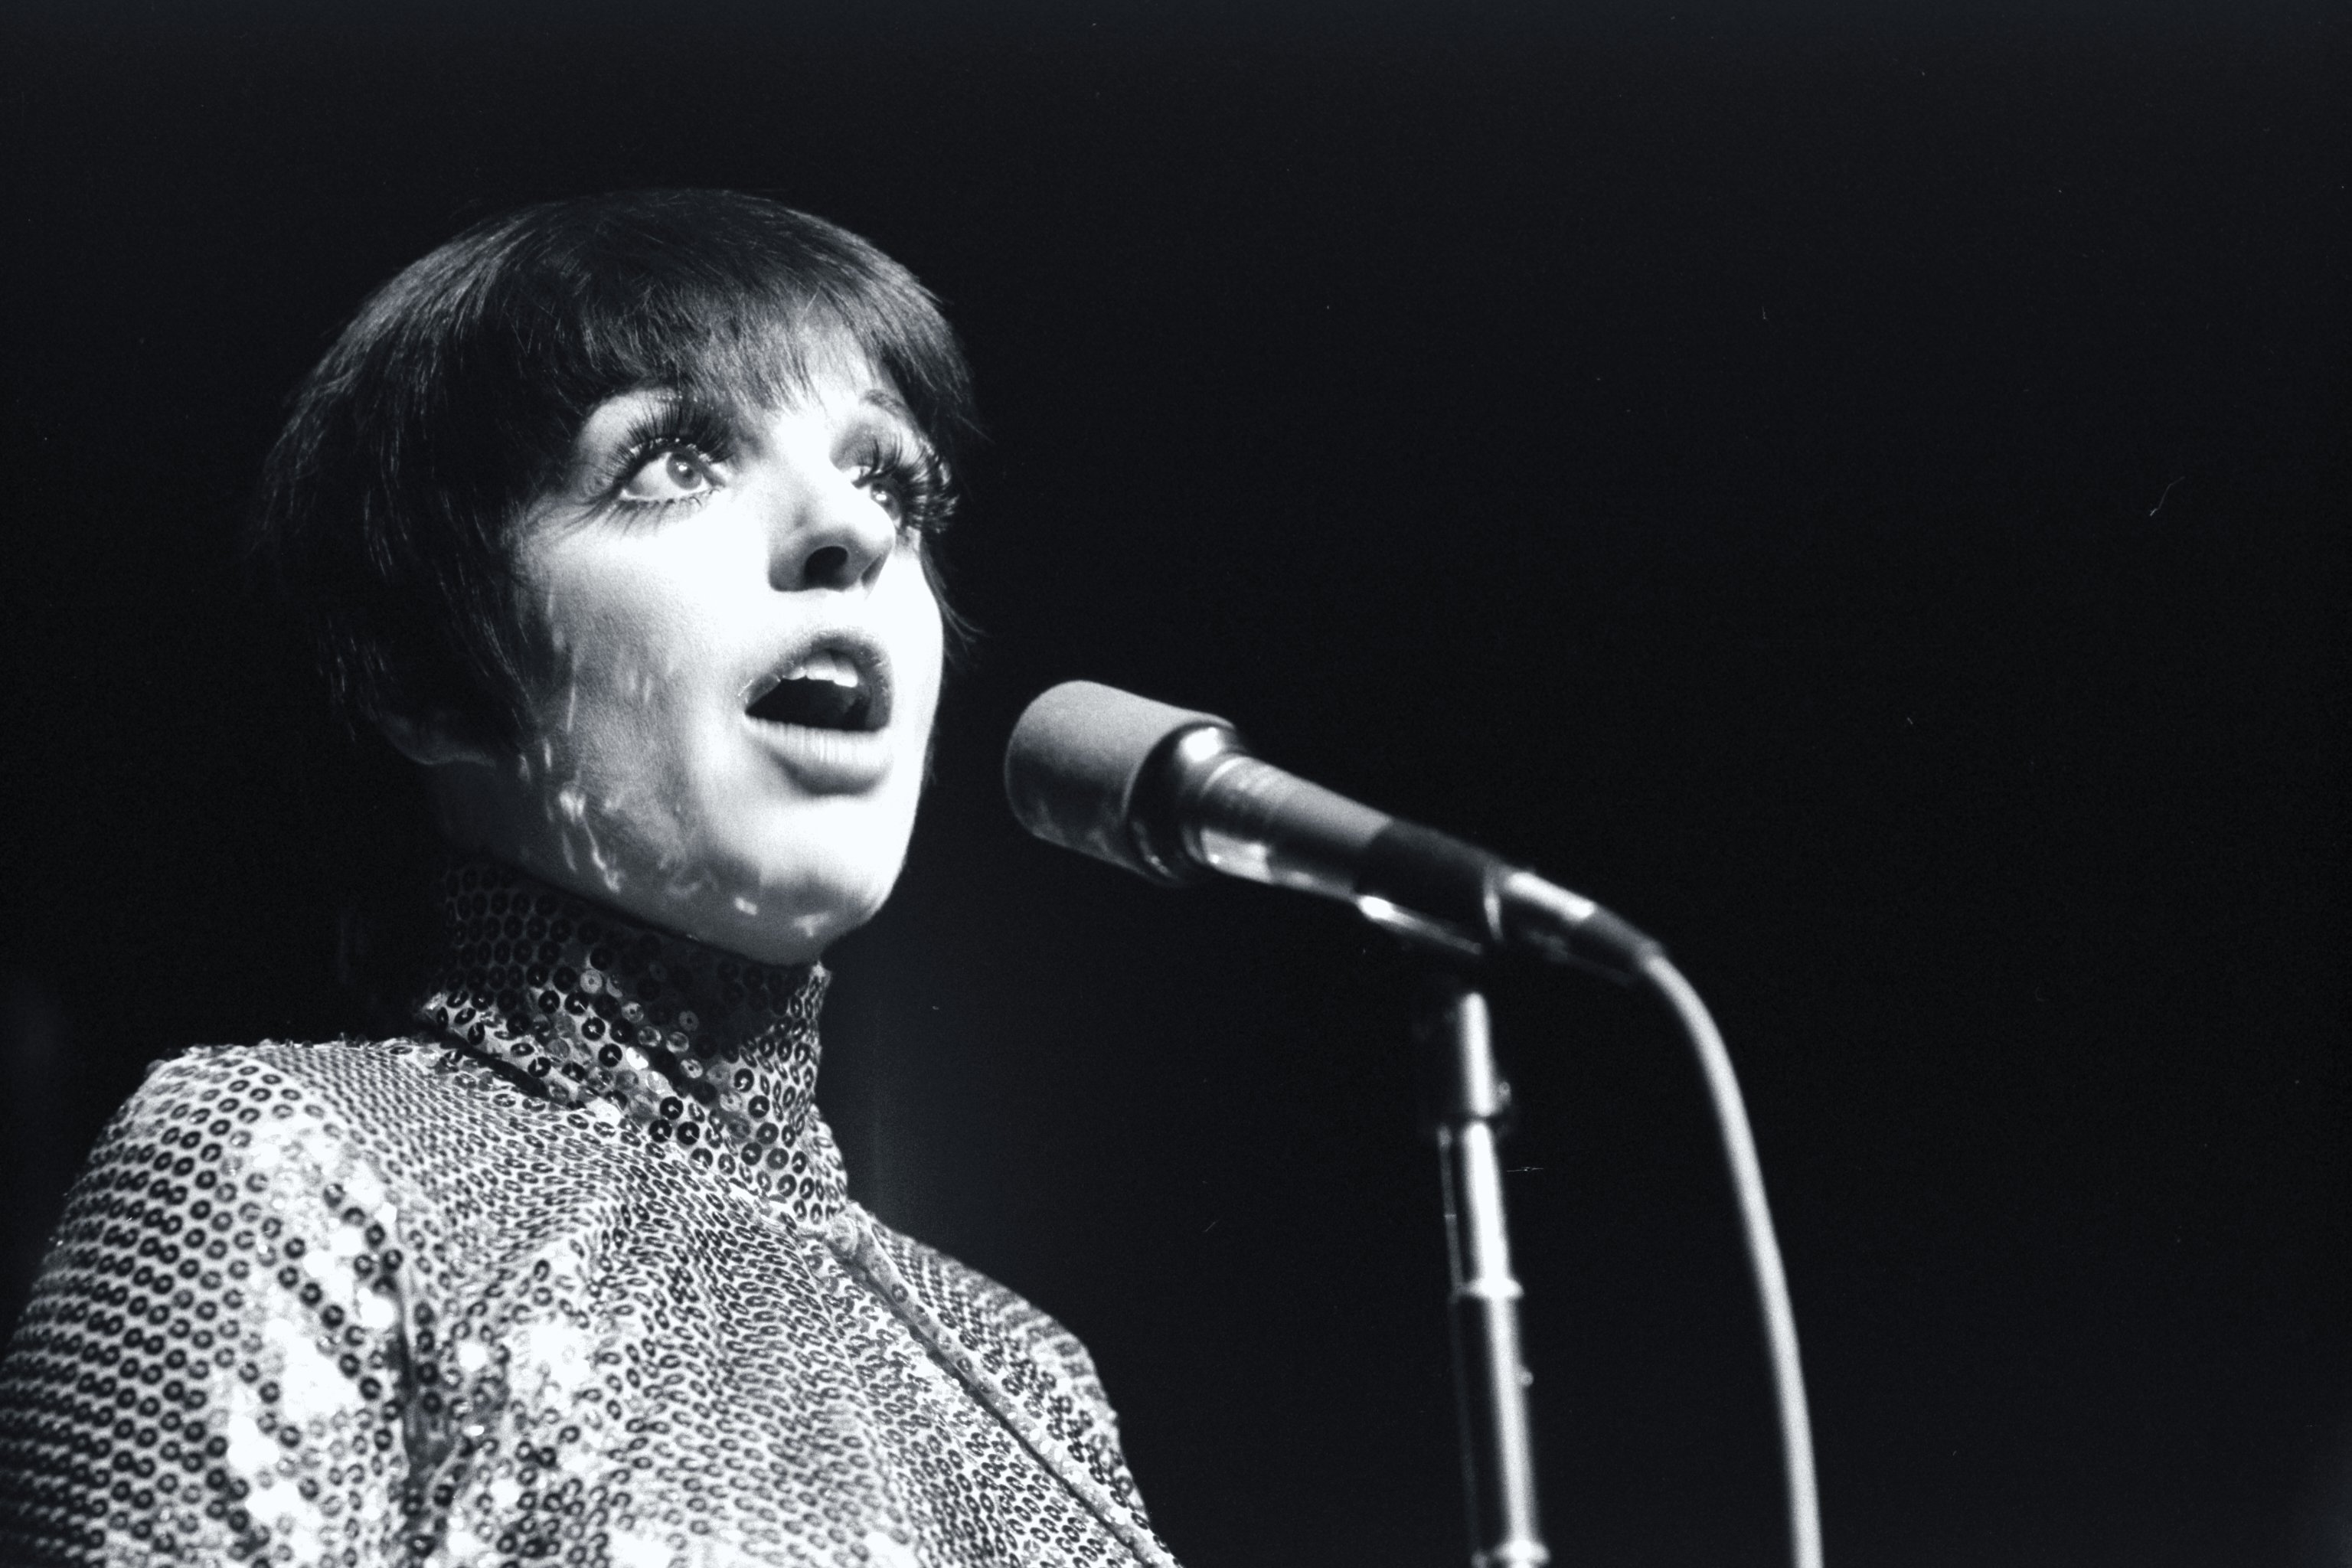 Liza Minnelli wears a sequined dress and sings into a microphone.